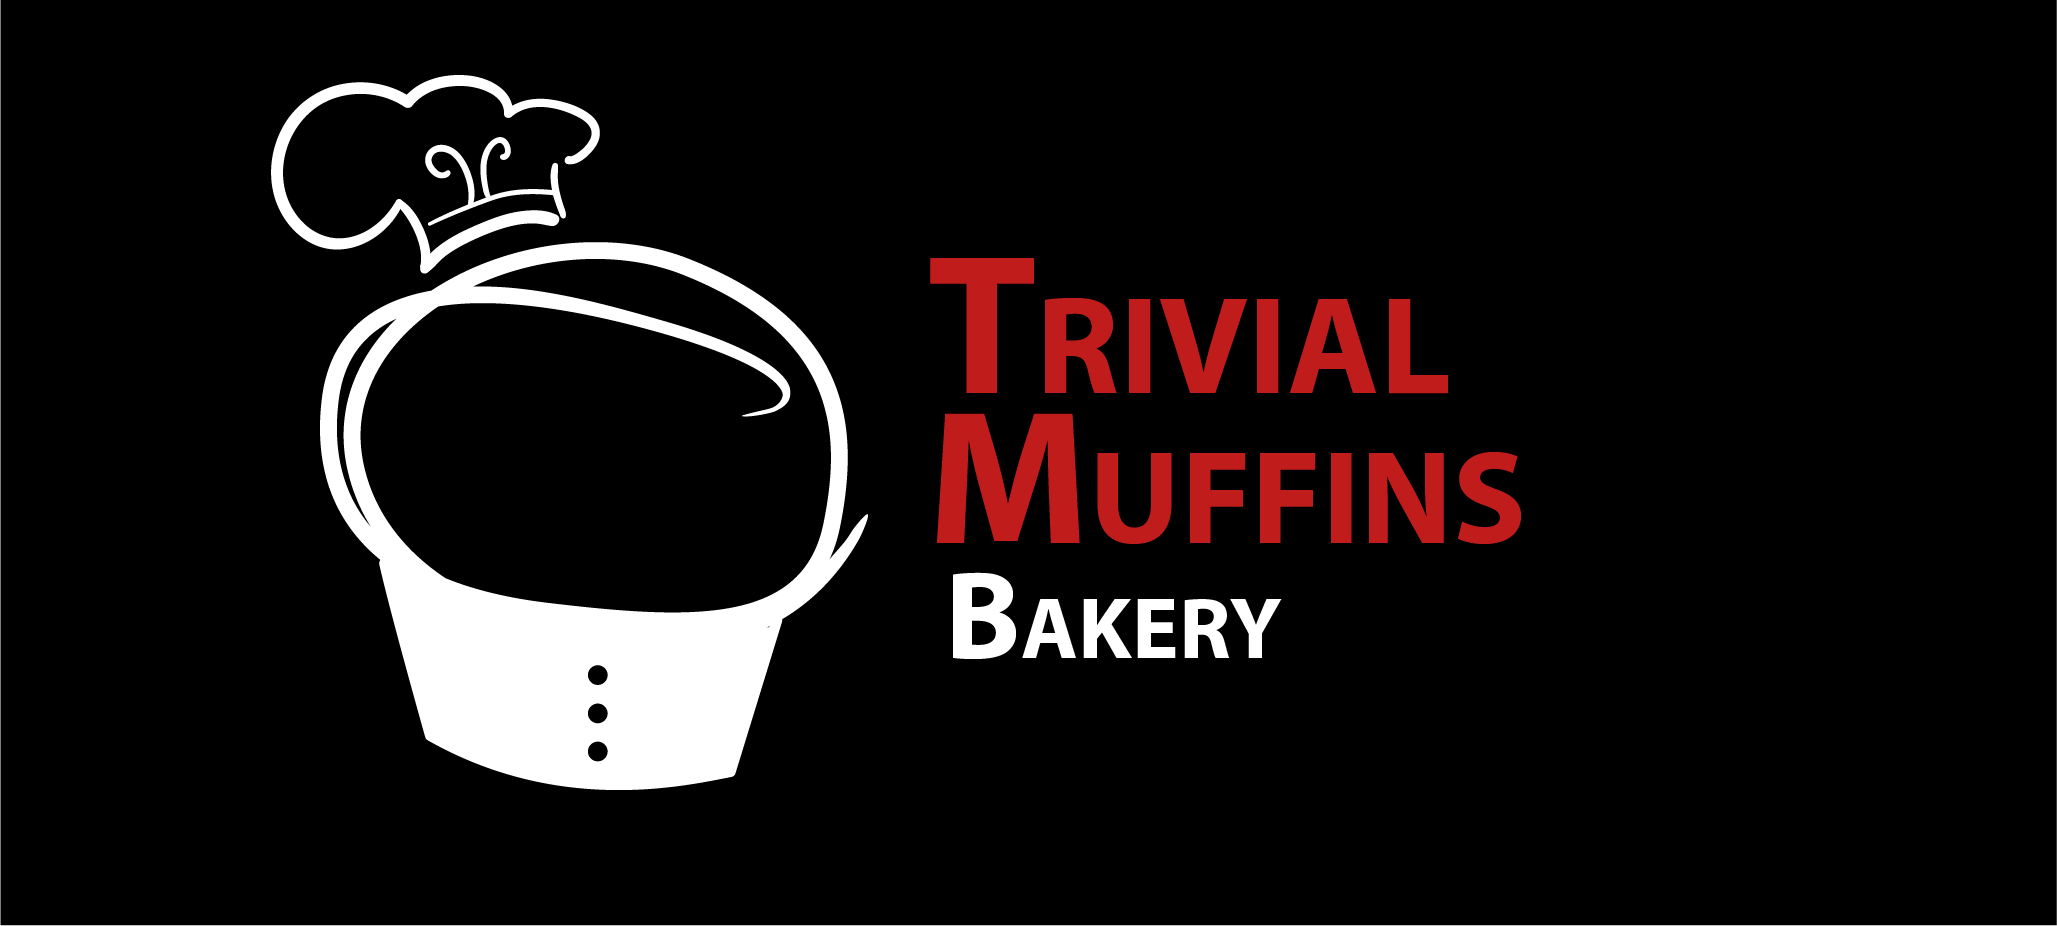 Trivial Muffins Bakery logo